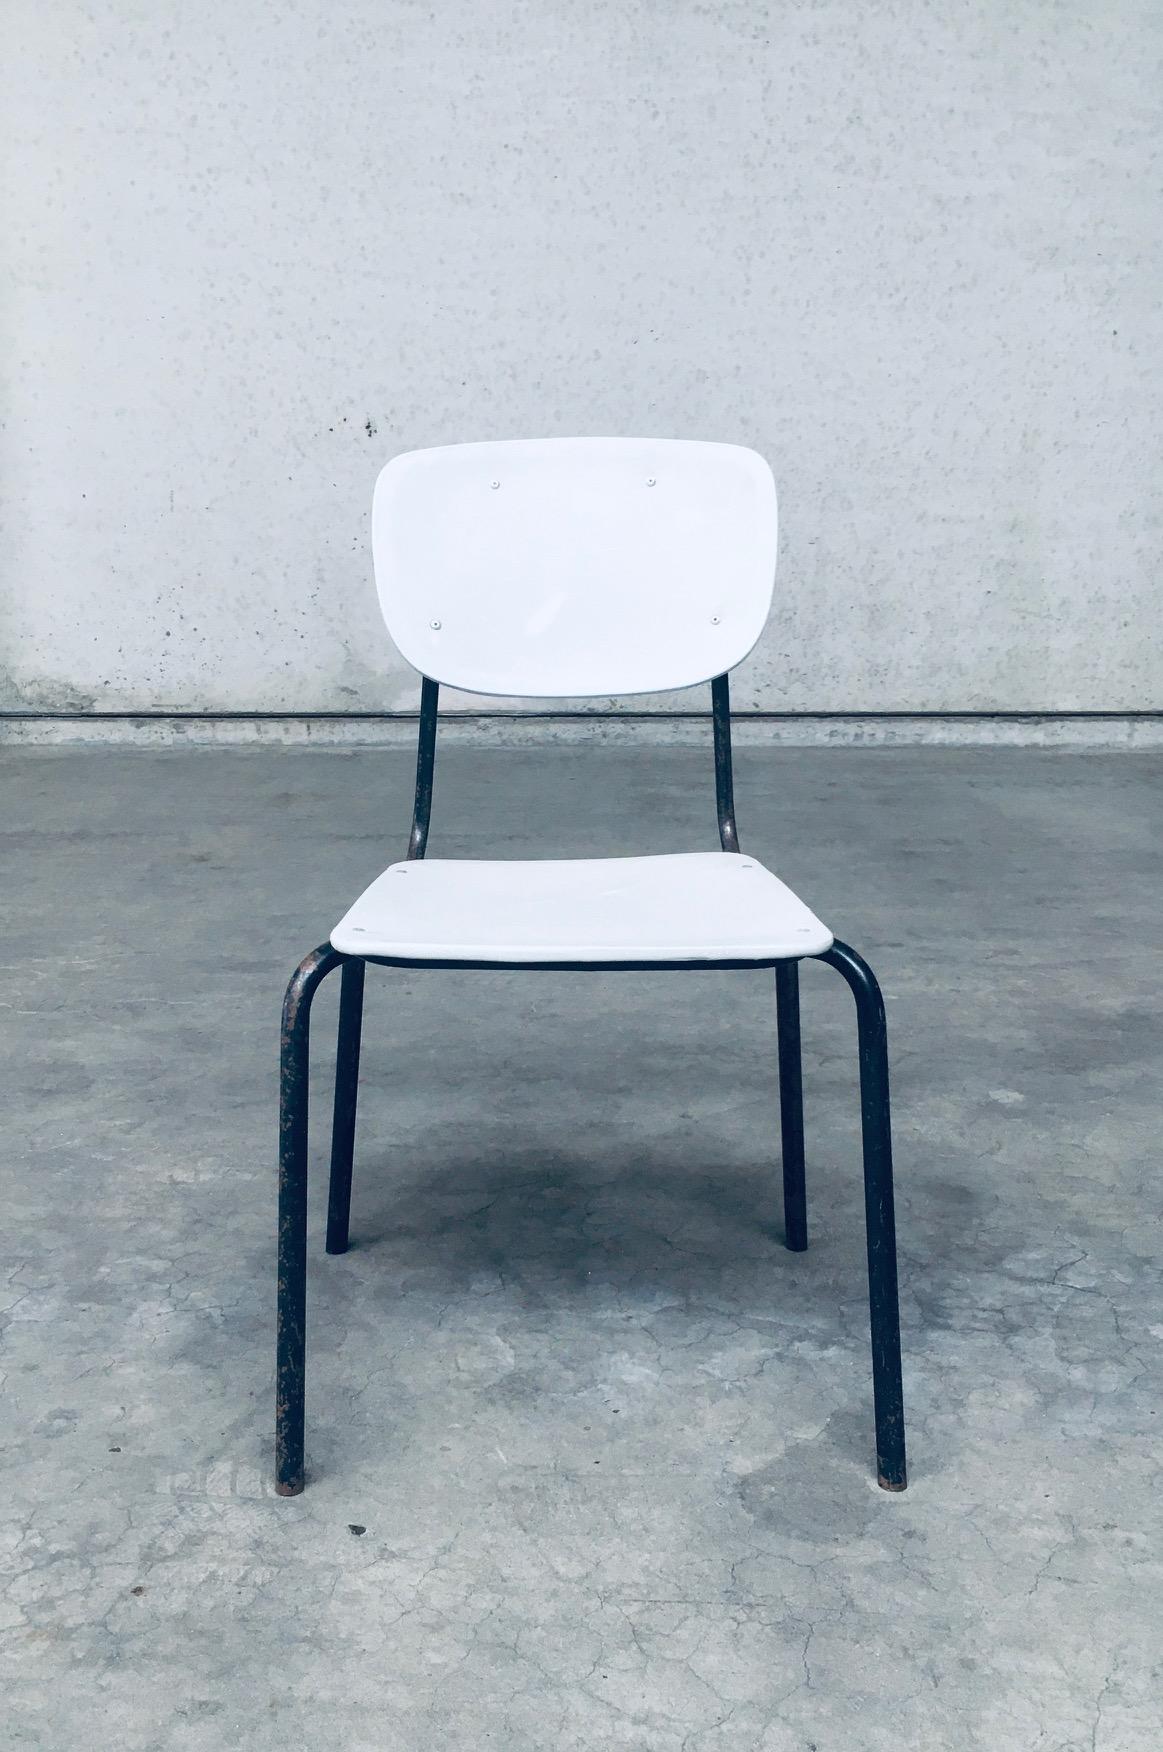 1960's Dutch Industrial Design Stacking Chairs For Sale 3